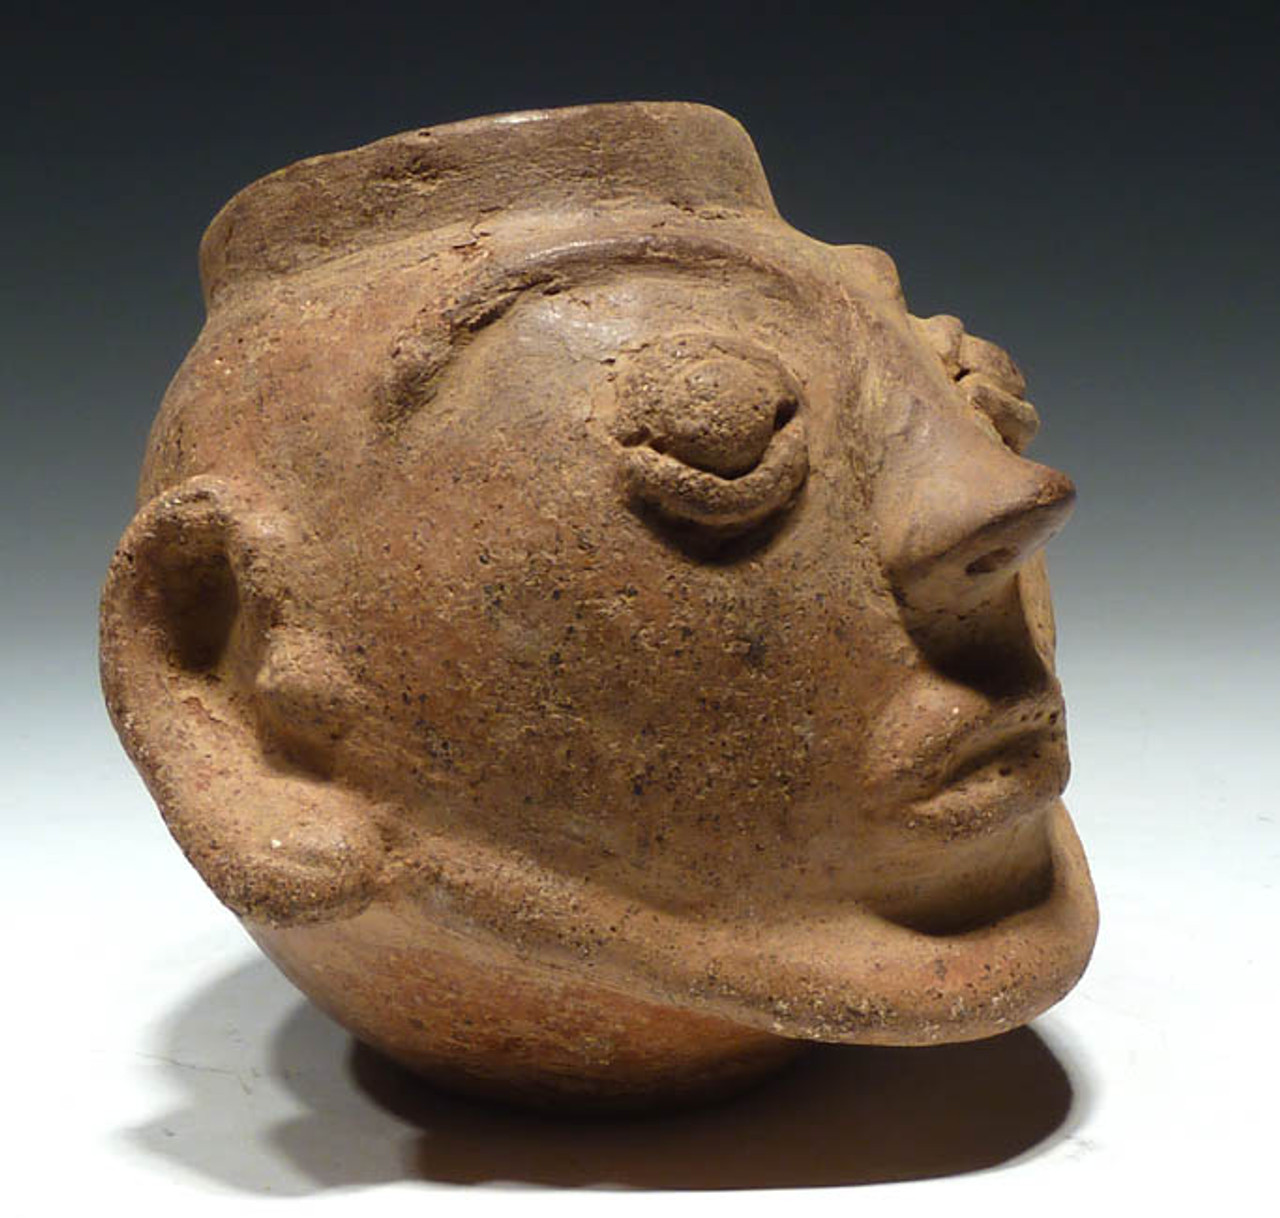 PC017 - PRE-COLUMBIAN HEAD-HUNTING TROPHY HEAD EFFIGY POT OF THE GREATER NICOYA CULTURE